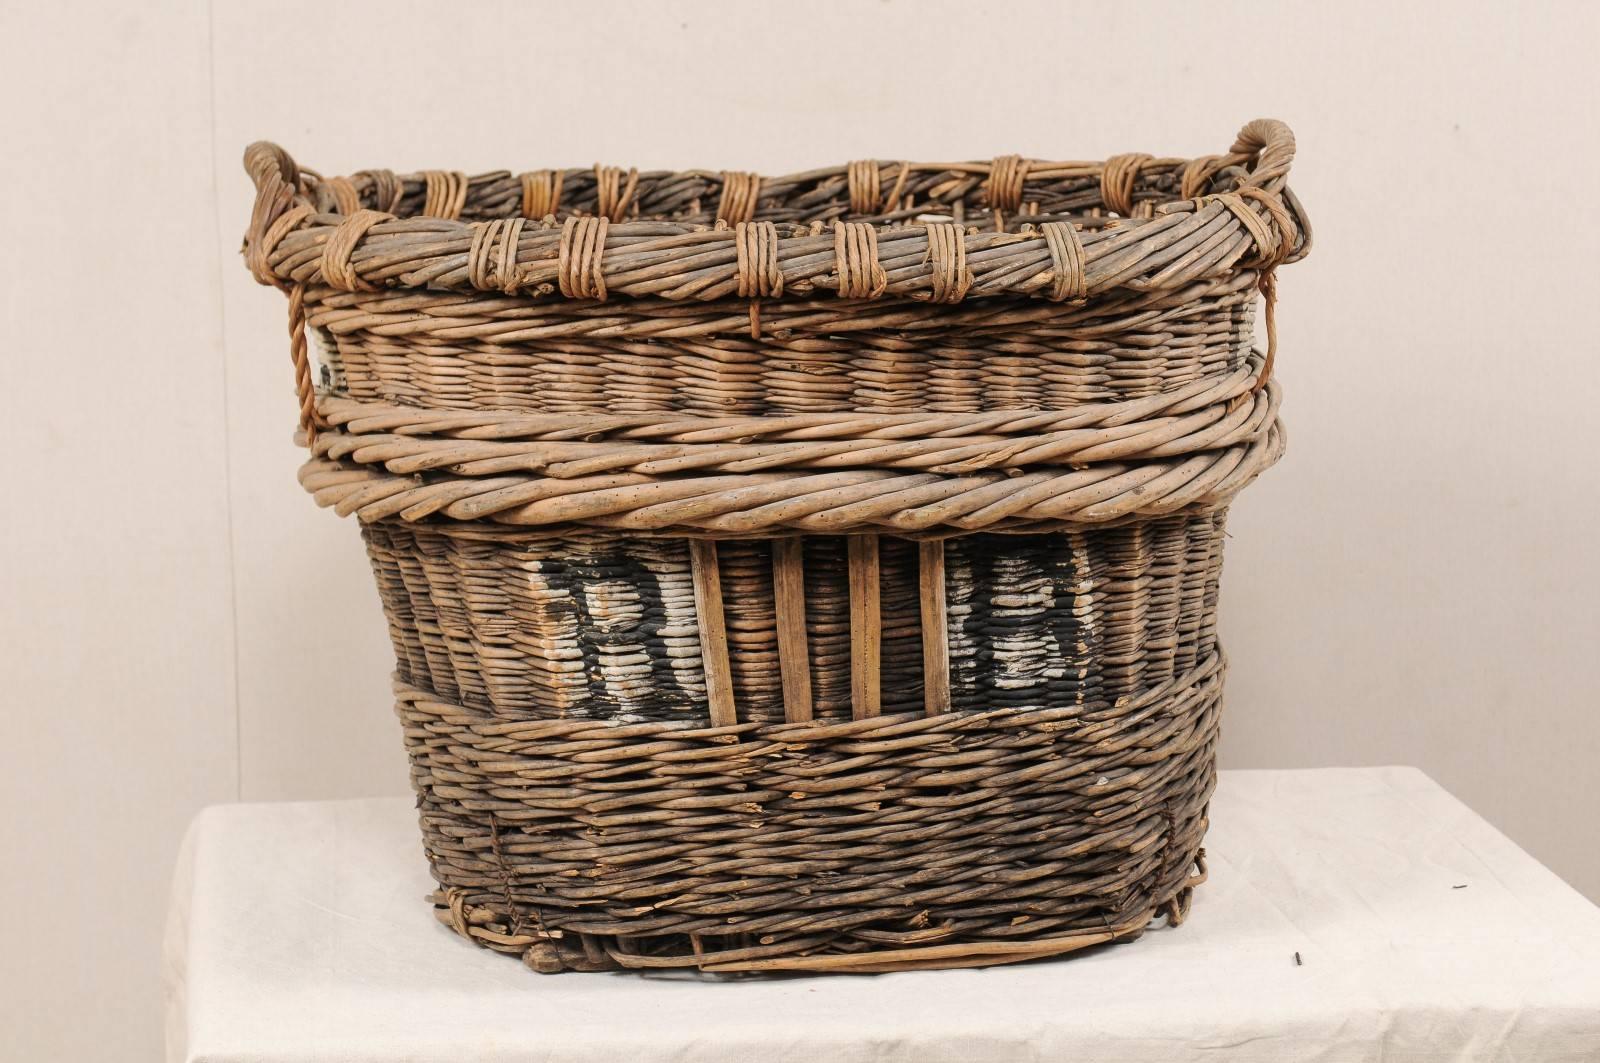 An antique French grape harvesting basket. This midcentury French basket is an excellent example of the baskets that were commonly used by the estates of Reims, France (the Champagne region) during the harvesting of grapes. The basket is nicely